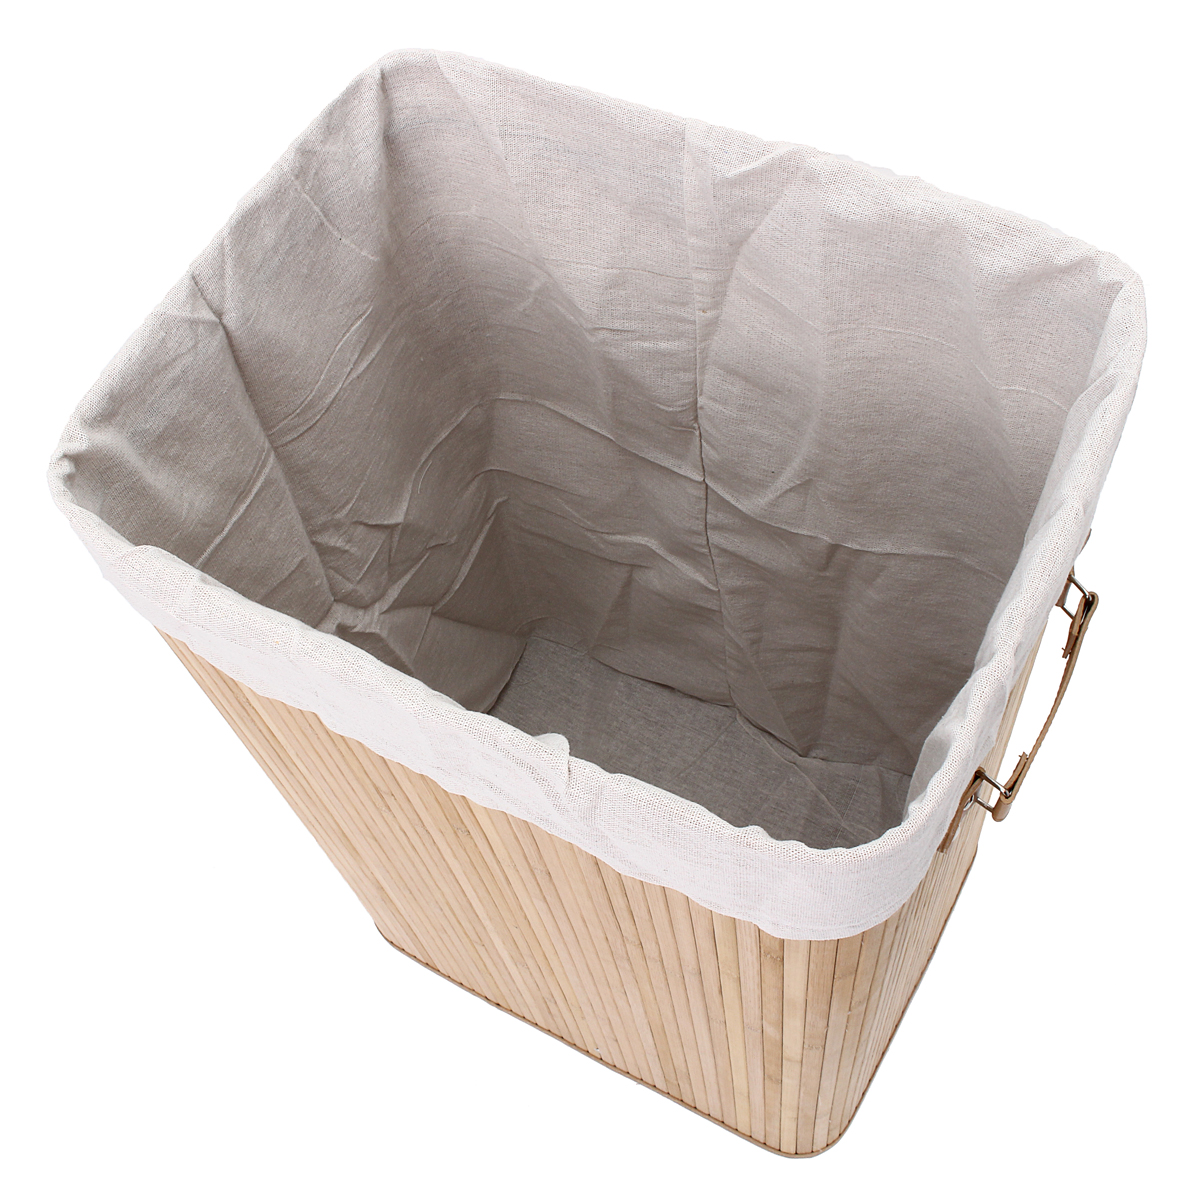 Black Handles XXL Tall Large Foldable Storage Hamper Rectangular Removable Liner Dirty Clothes Bin Box with Lid ALINK 100L Bamboo Laundry Basket with 2 Sections